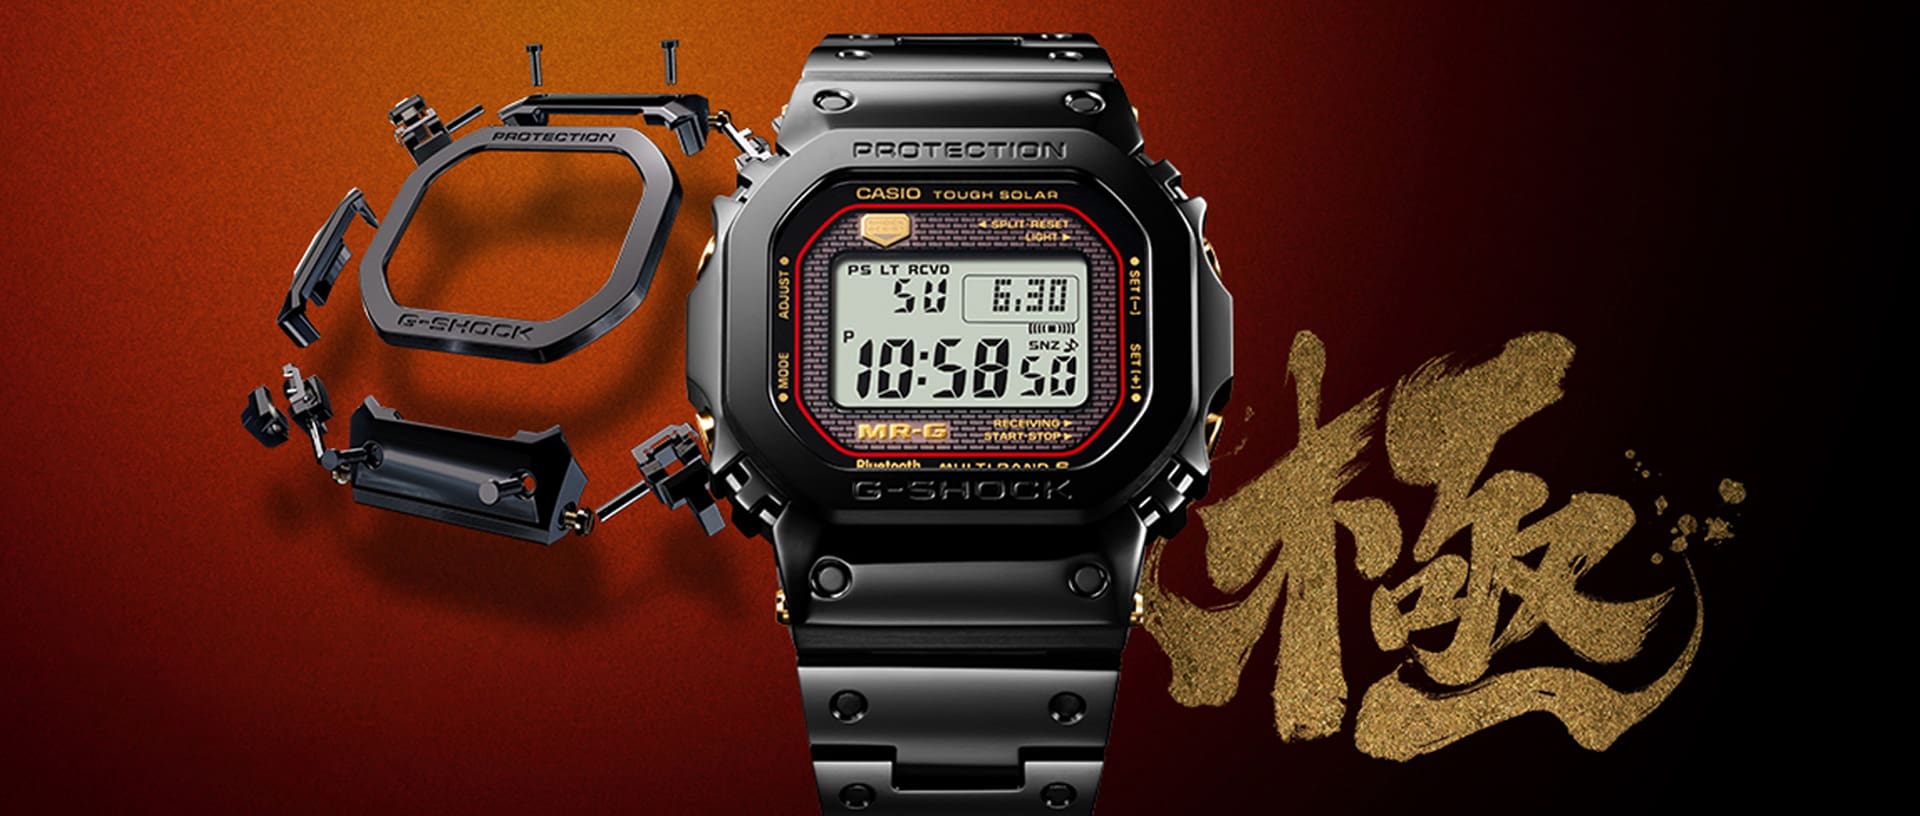 G-SHOCK MR-G MRGB5000 Desktop KIWAMI digital black metal watch with red and gold accents and exploded watch bezel components on a red background with gold kanji